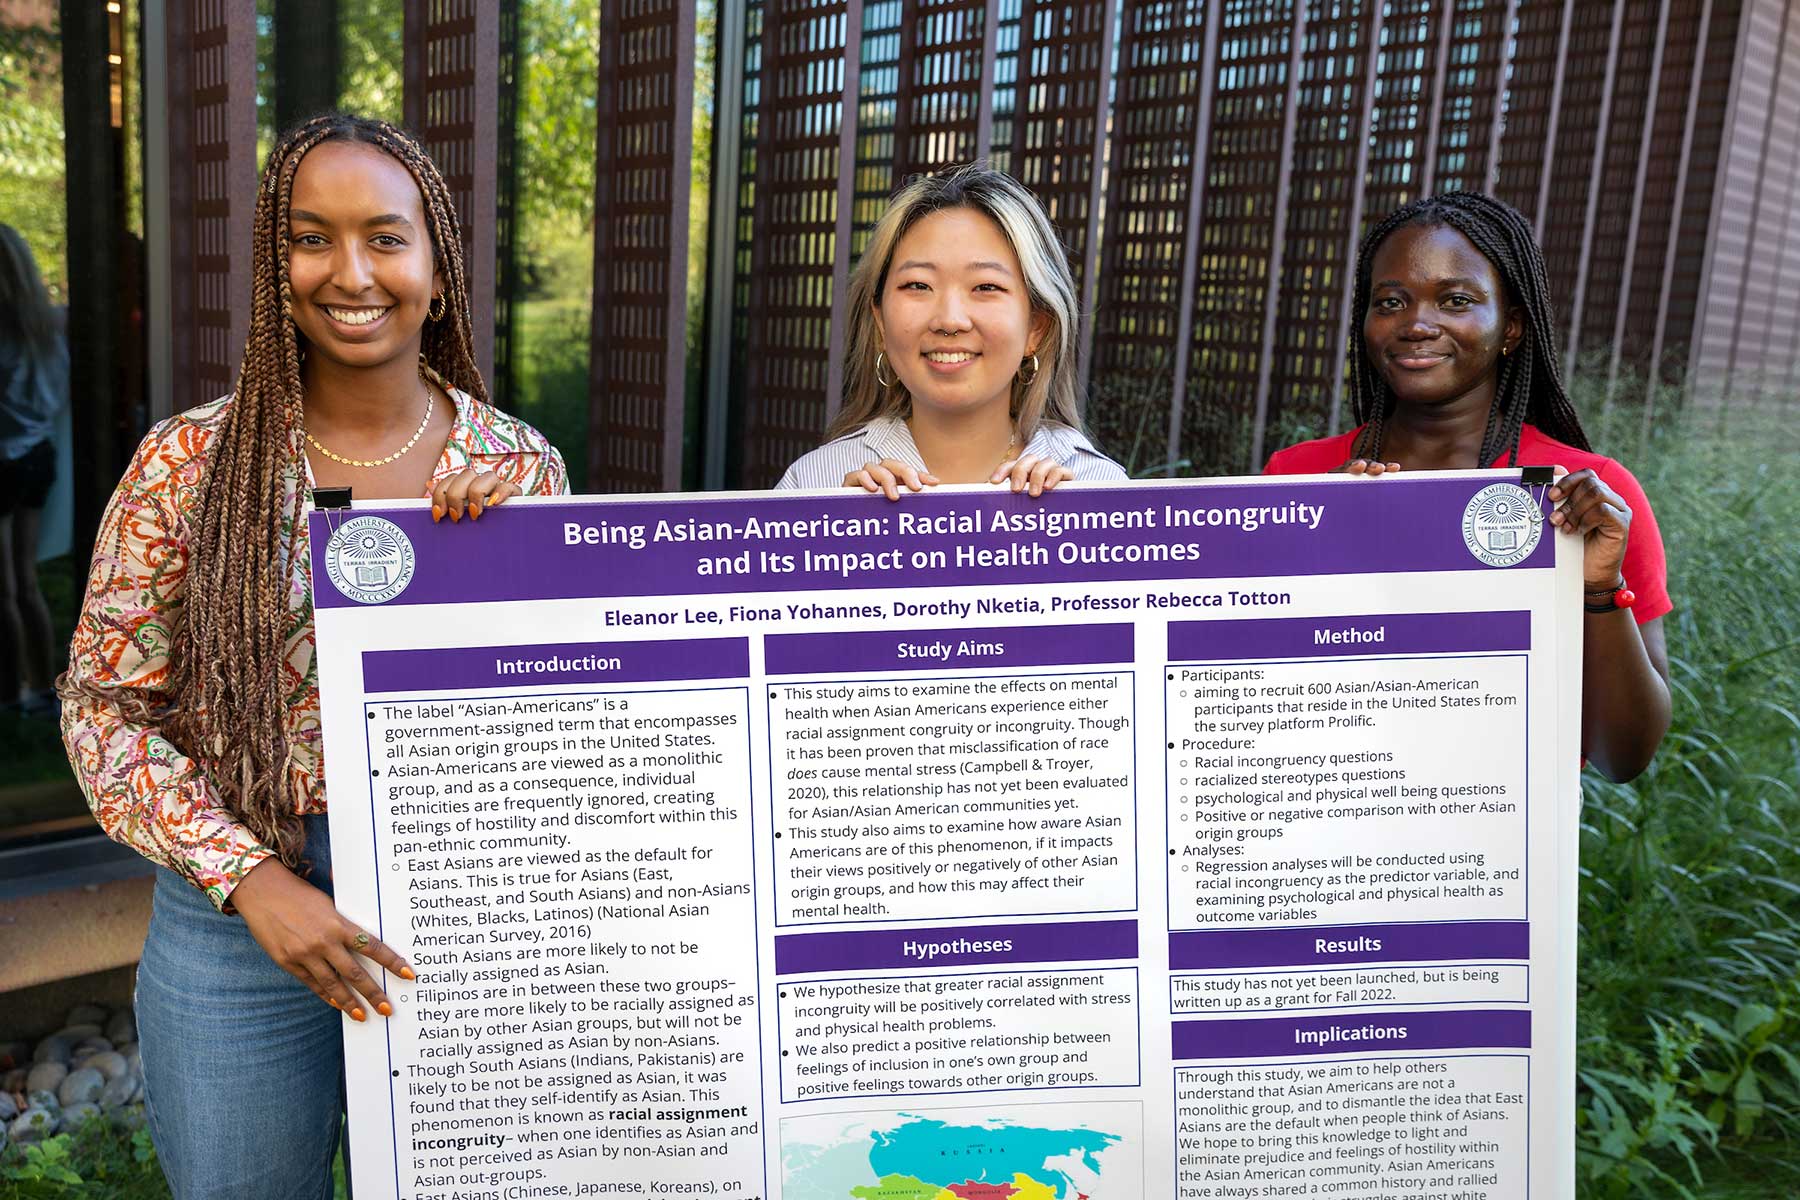 Eleanor Lee, Fiona Yohannes, and Dorothy Nketia hold a poster describing their summer research project.